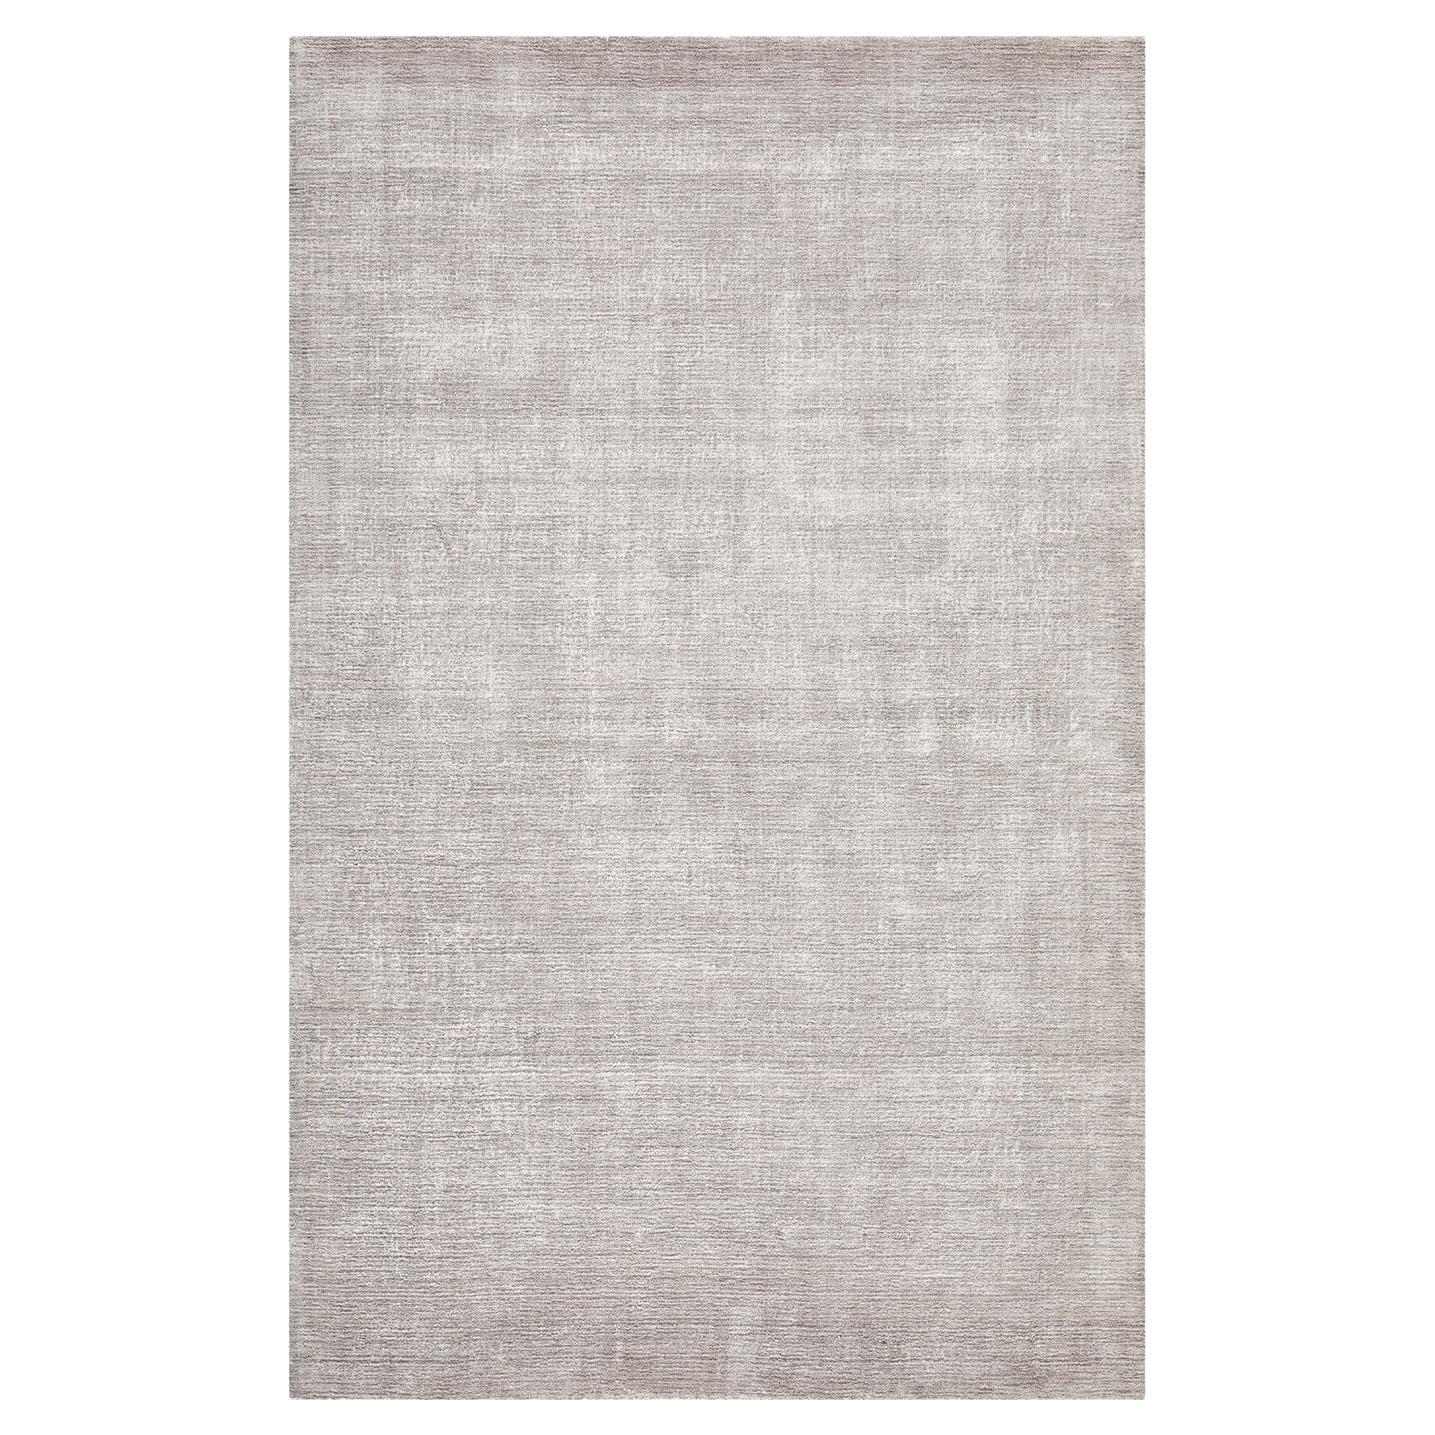 Solo Rugs Lodhi Contemporary Solid Handmade Area Rug Gray 9' 0" x 12' 0"